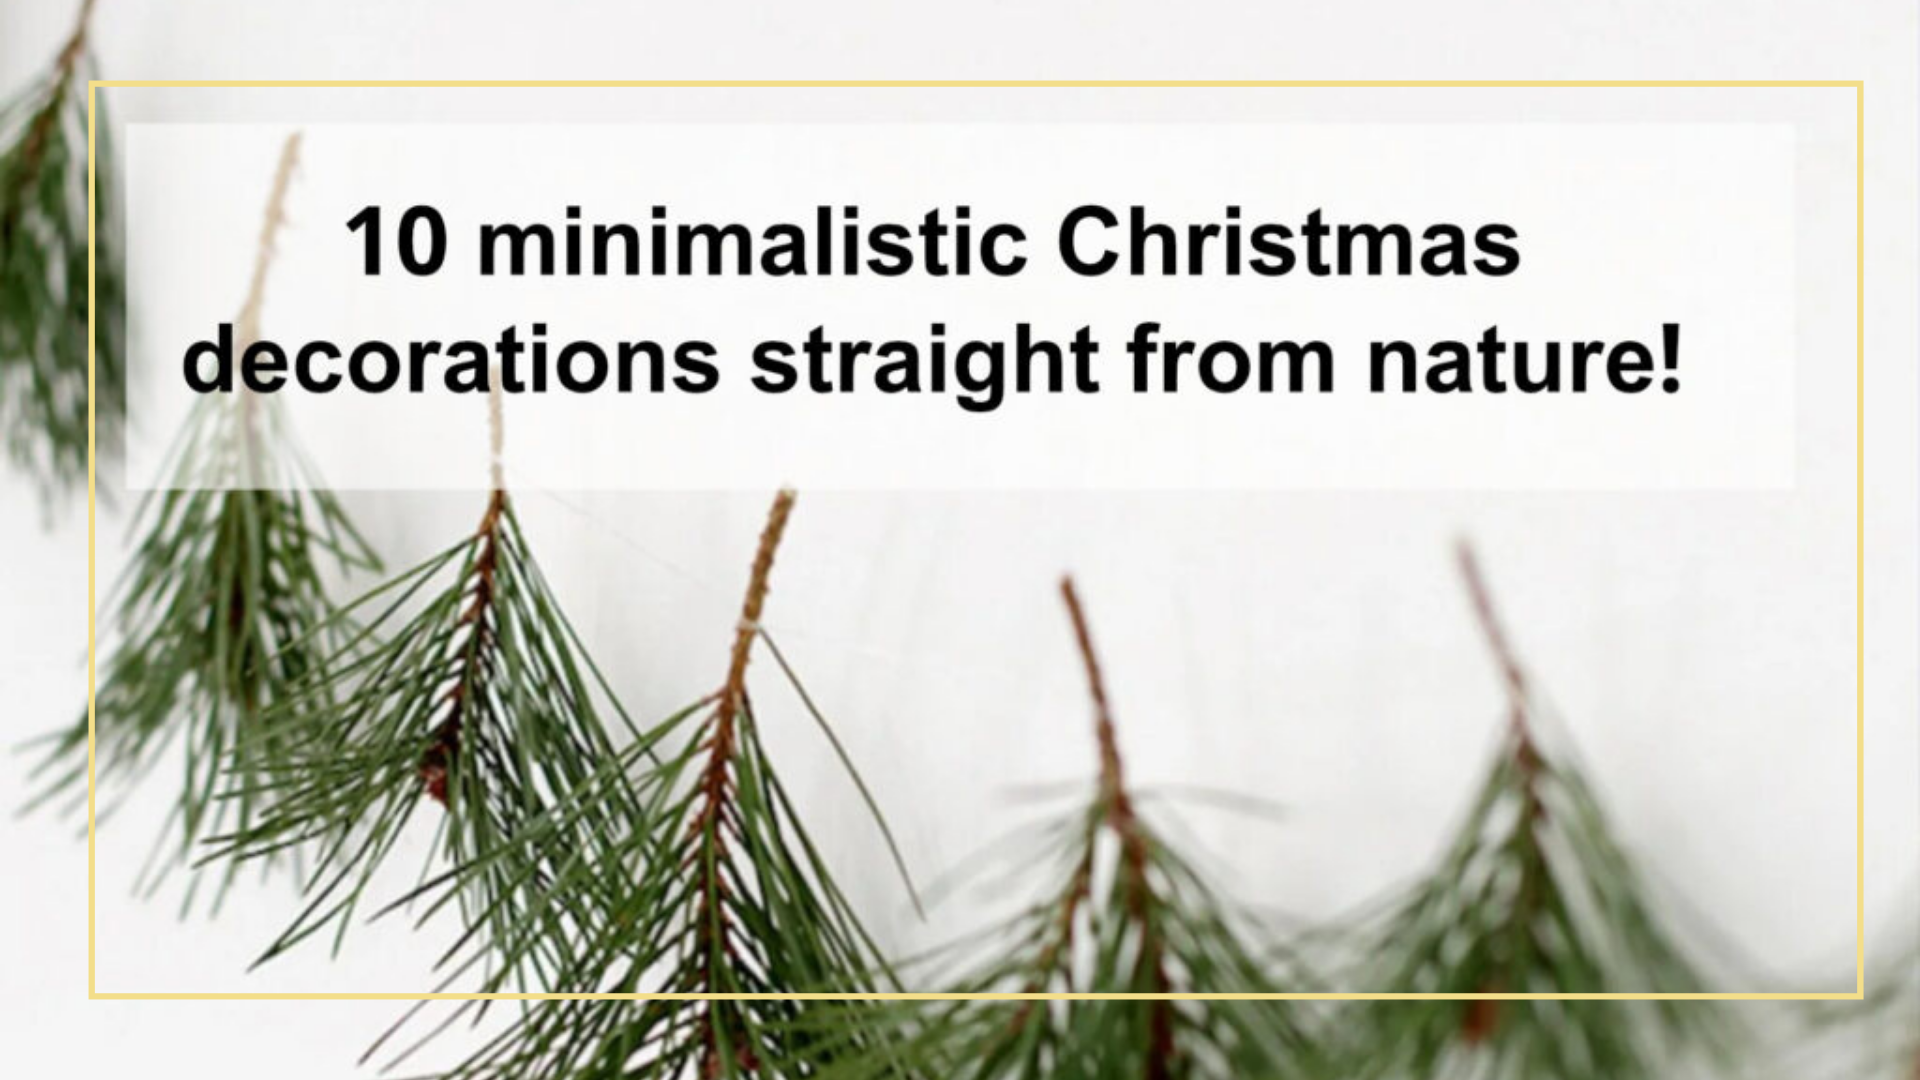 10 minimalistic Christmas decorations straight from nature!